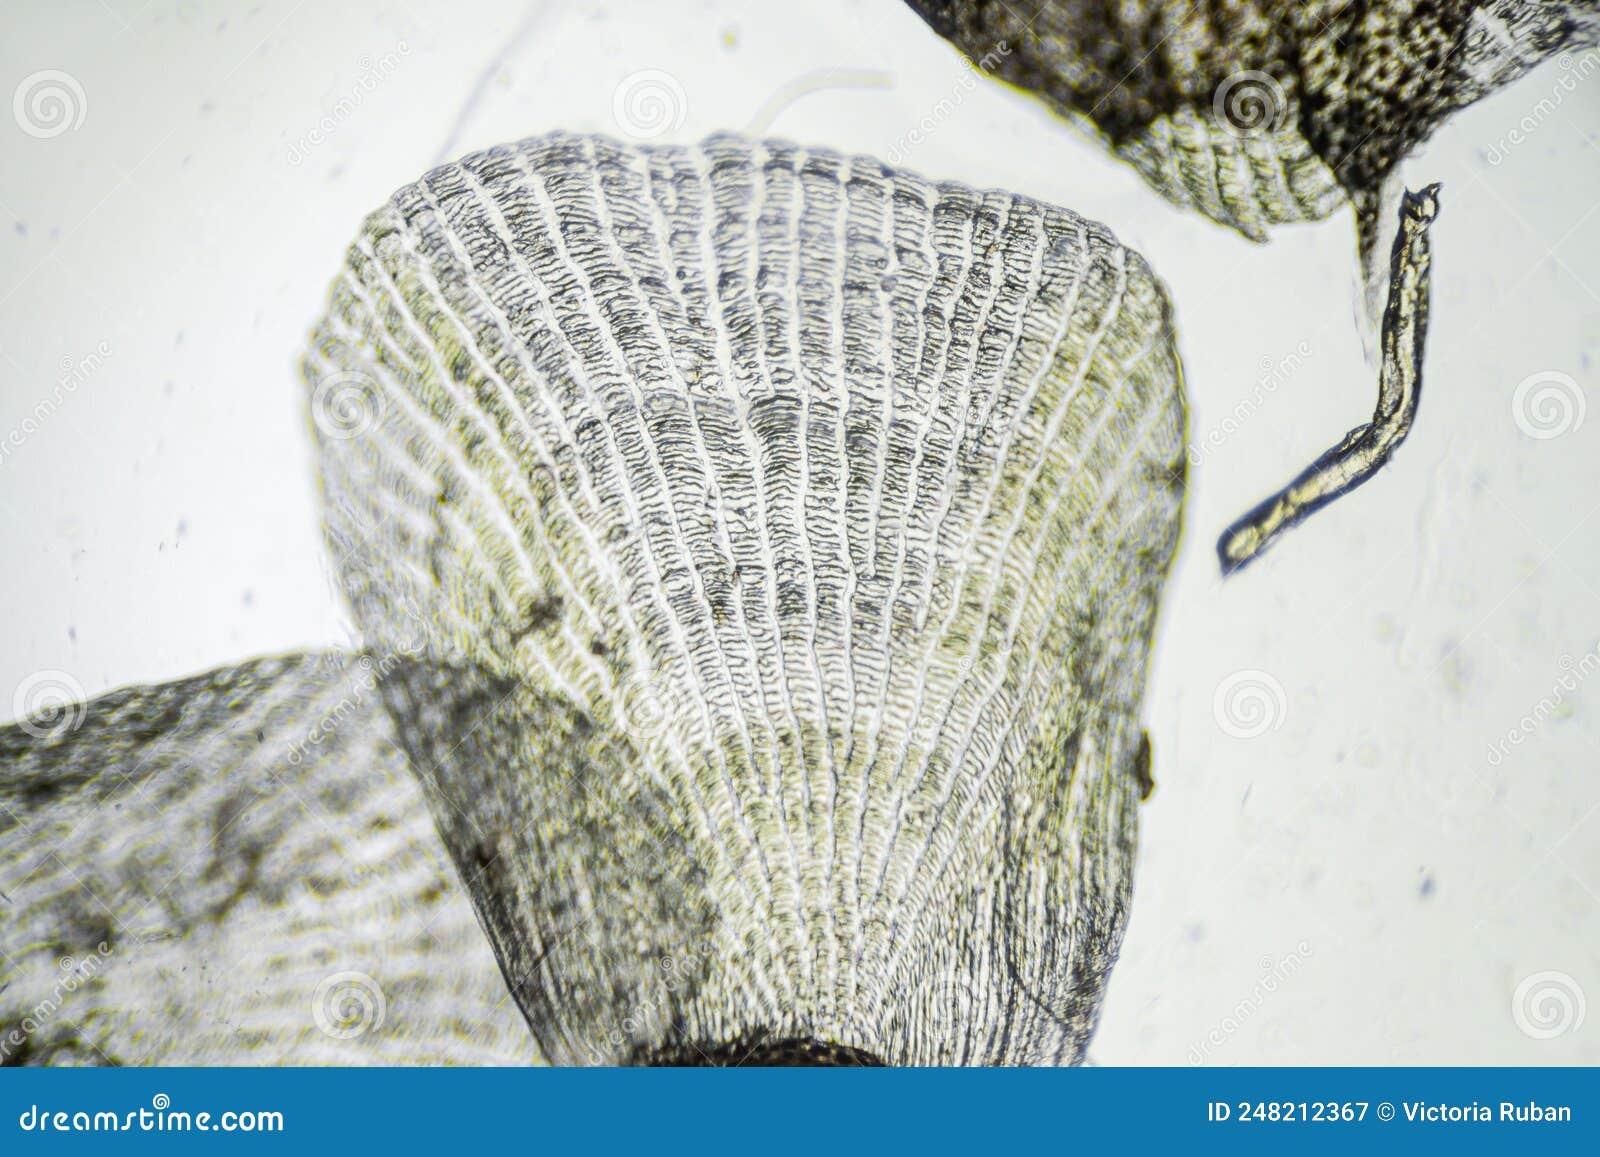 Natural Marine Fish Scale Under a Microscope Stock Image - Image of scaly,  natural: 248212367